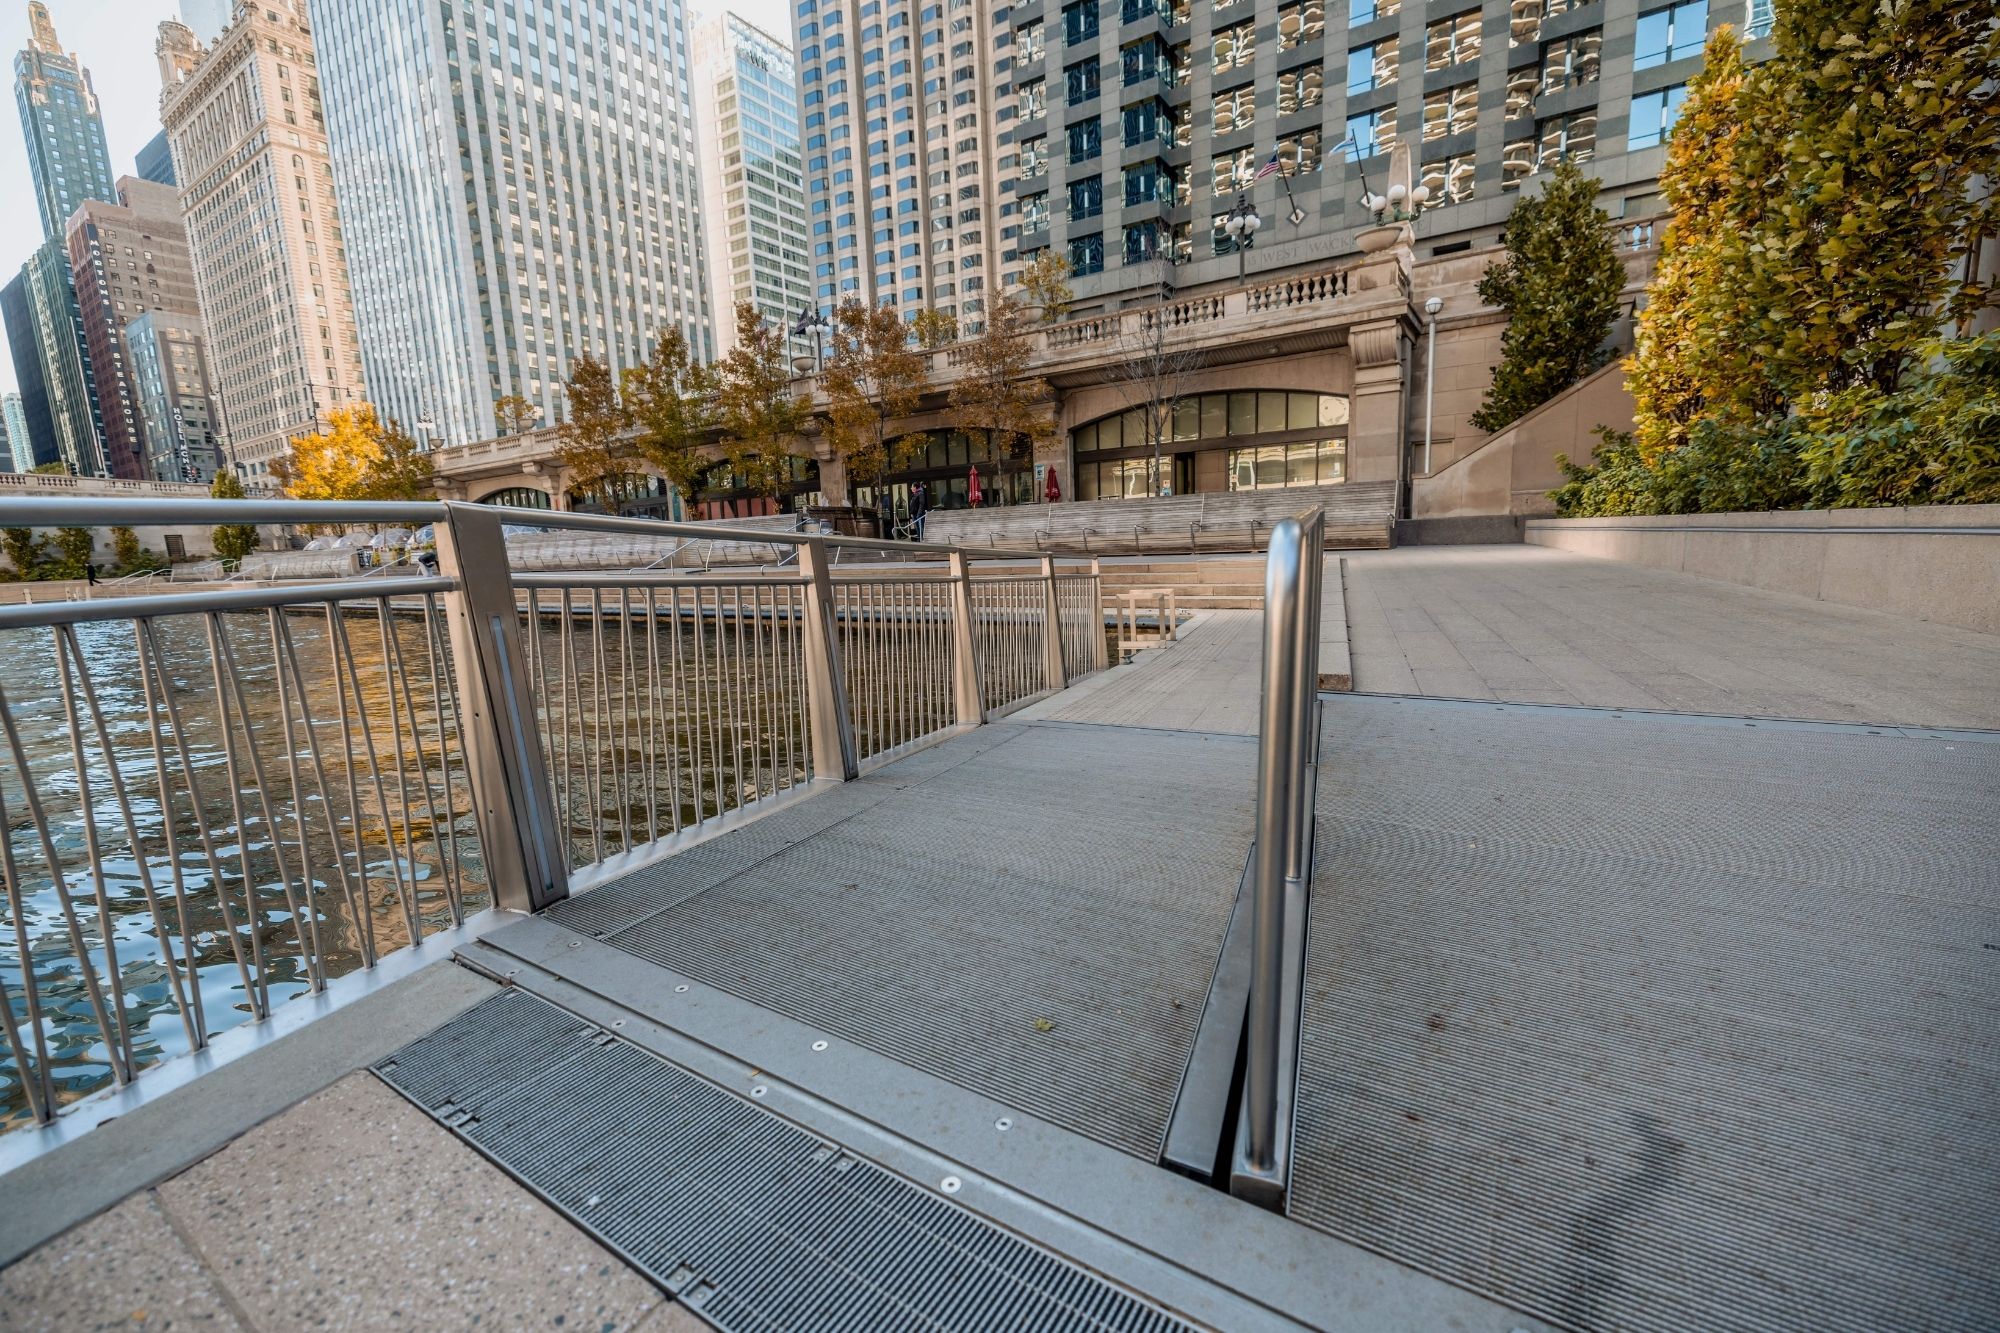 Grating ramp and bridge allow airflow and drainage at the Chicago Riverwalk